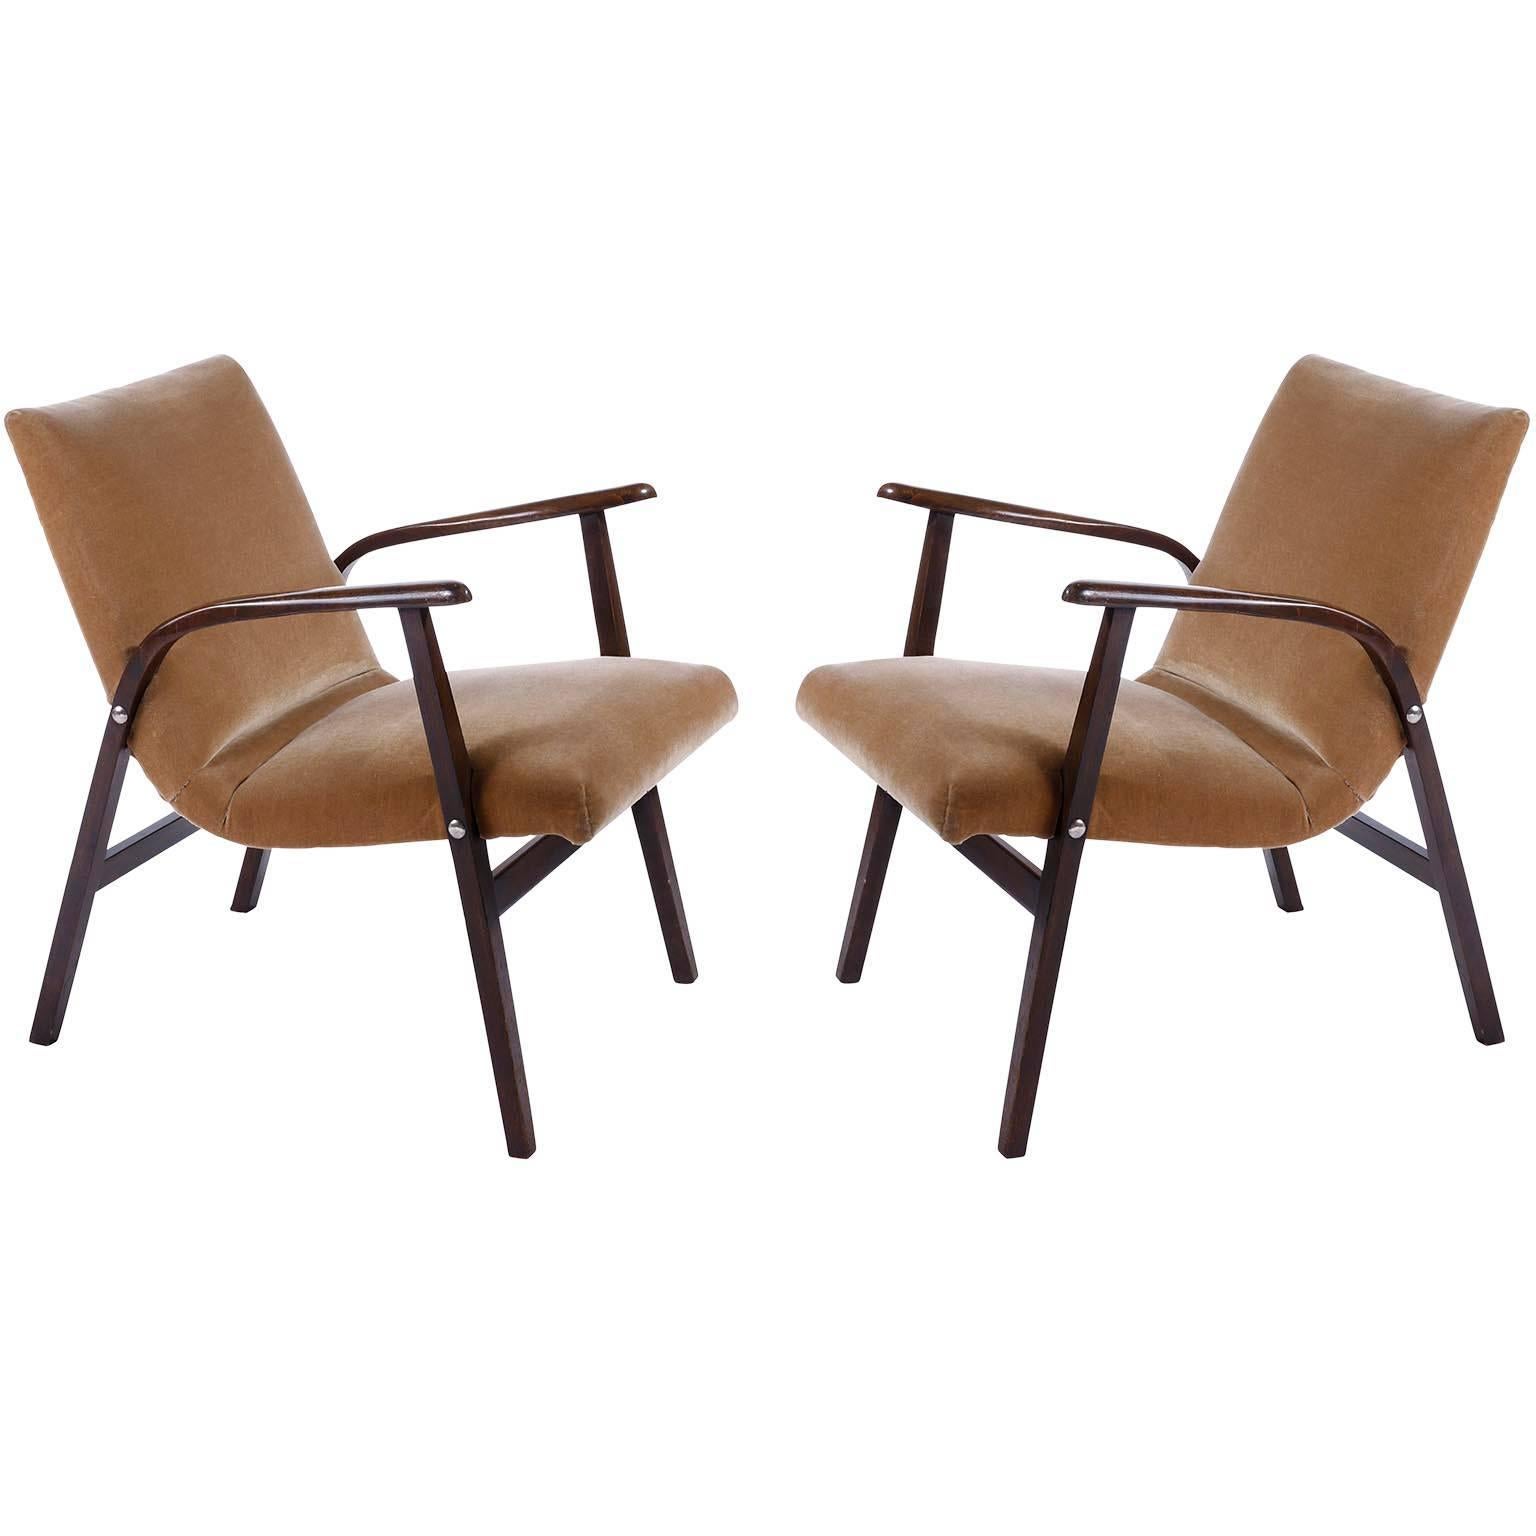 Roland Rainer, Set of 12 Armchairs Stacking Chairs, 1951 7